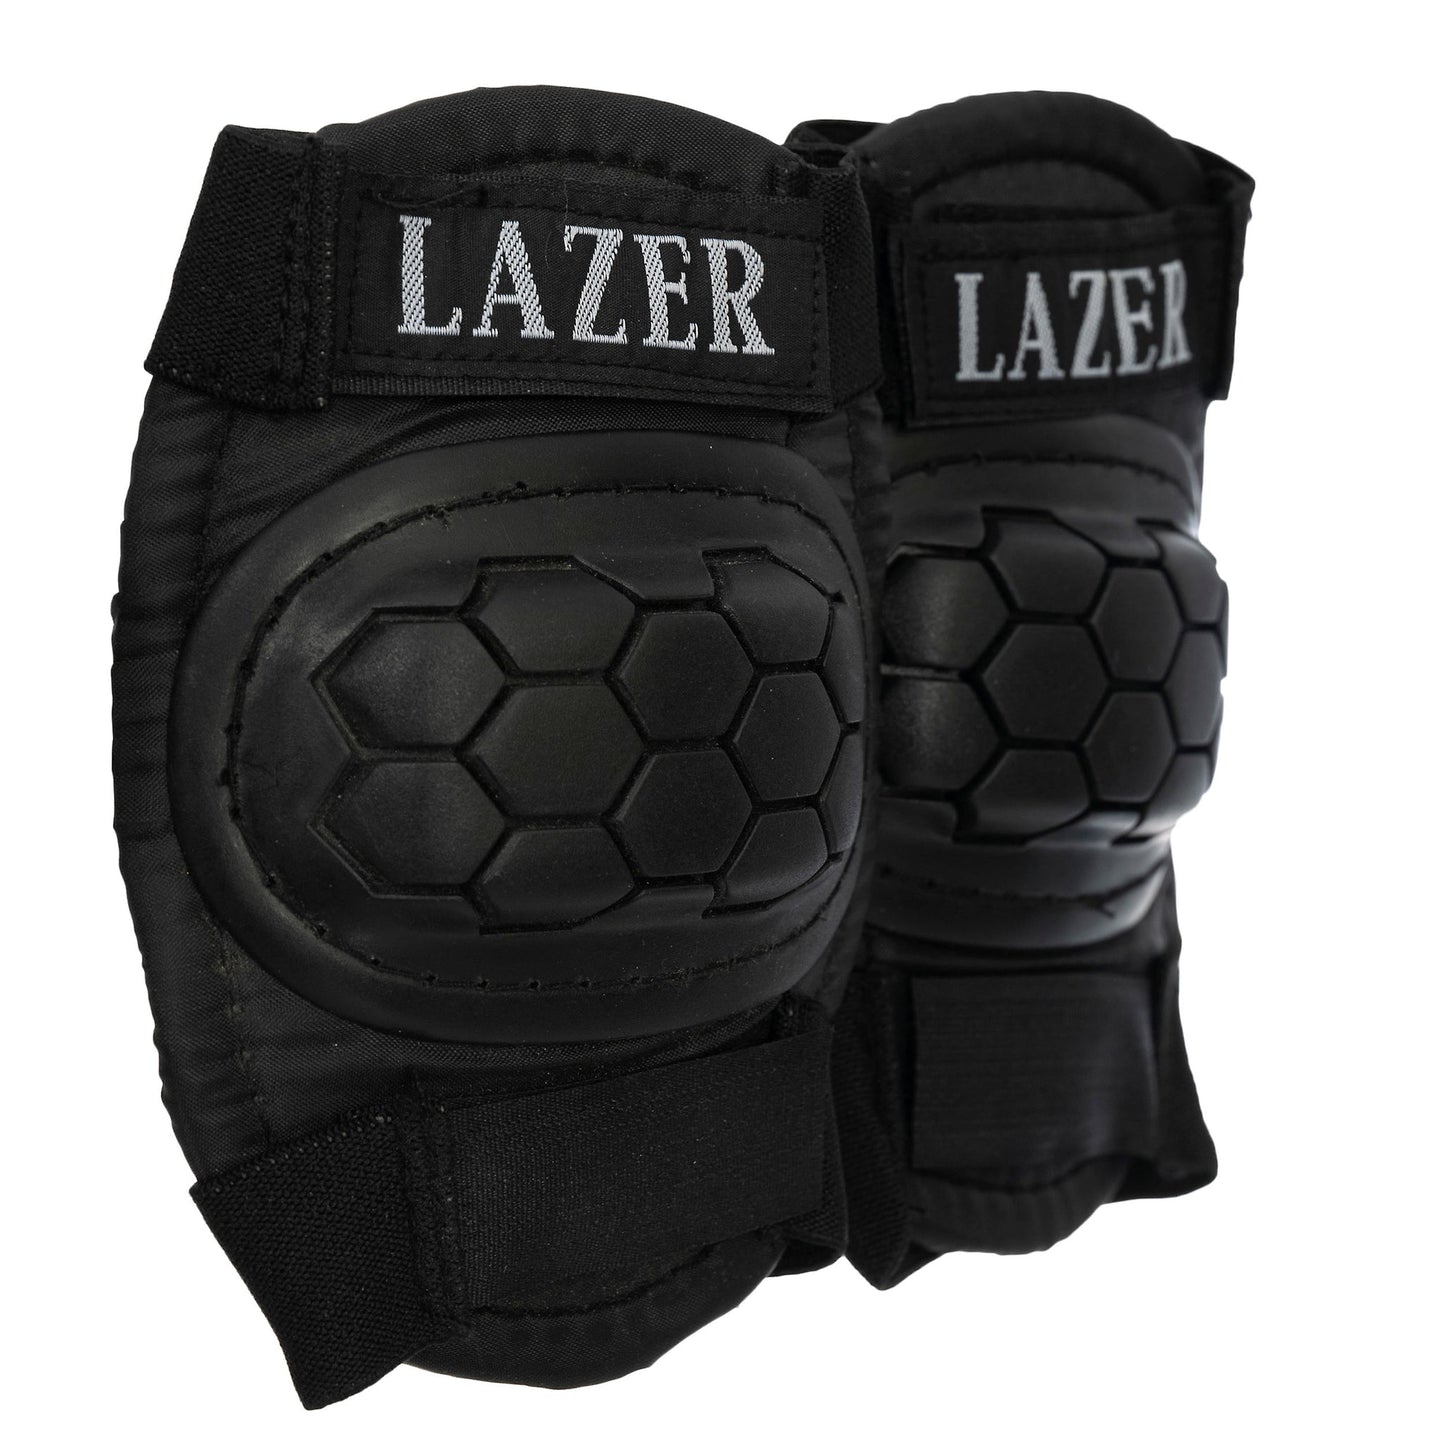 elbow pads